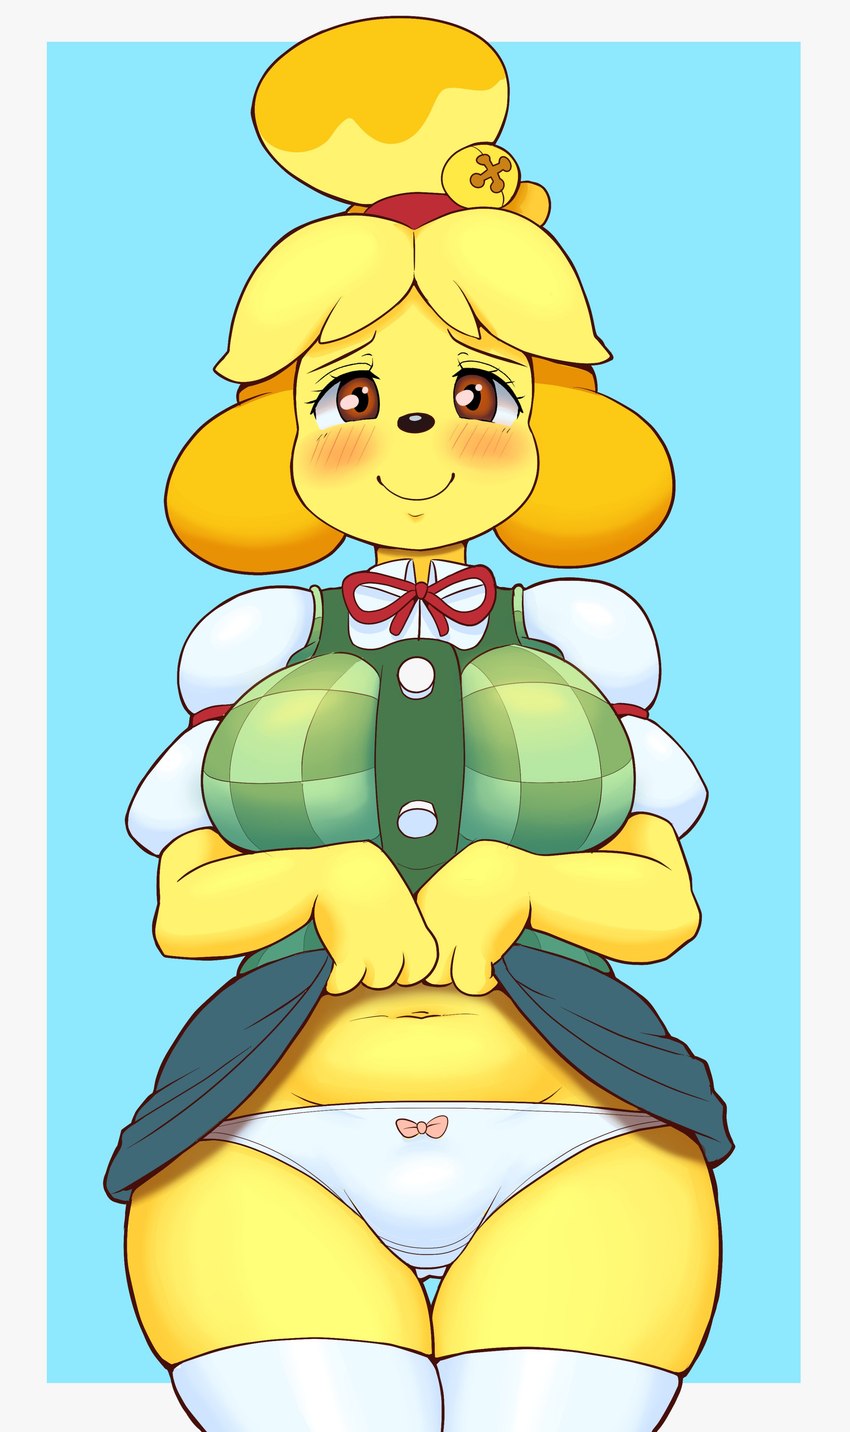 isabelle (animal crossing and etc) created by ooomaybeitscake